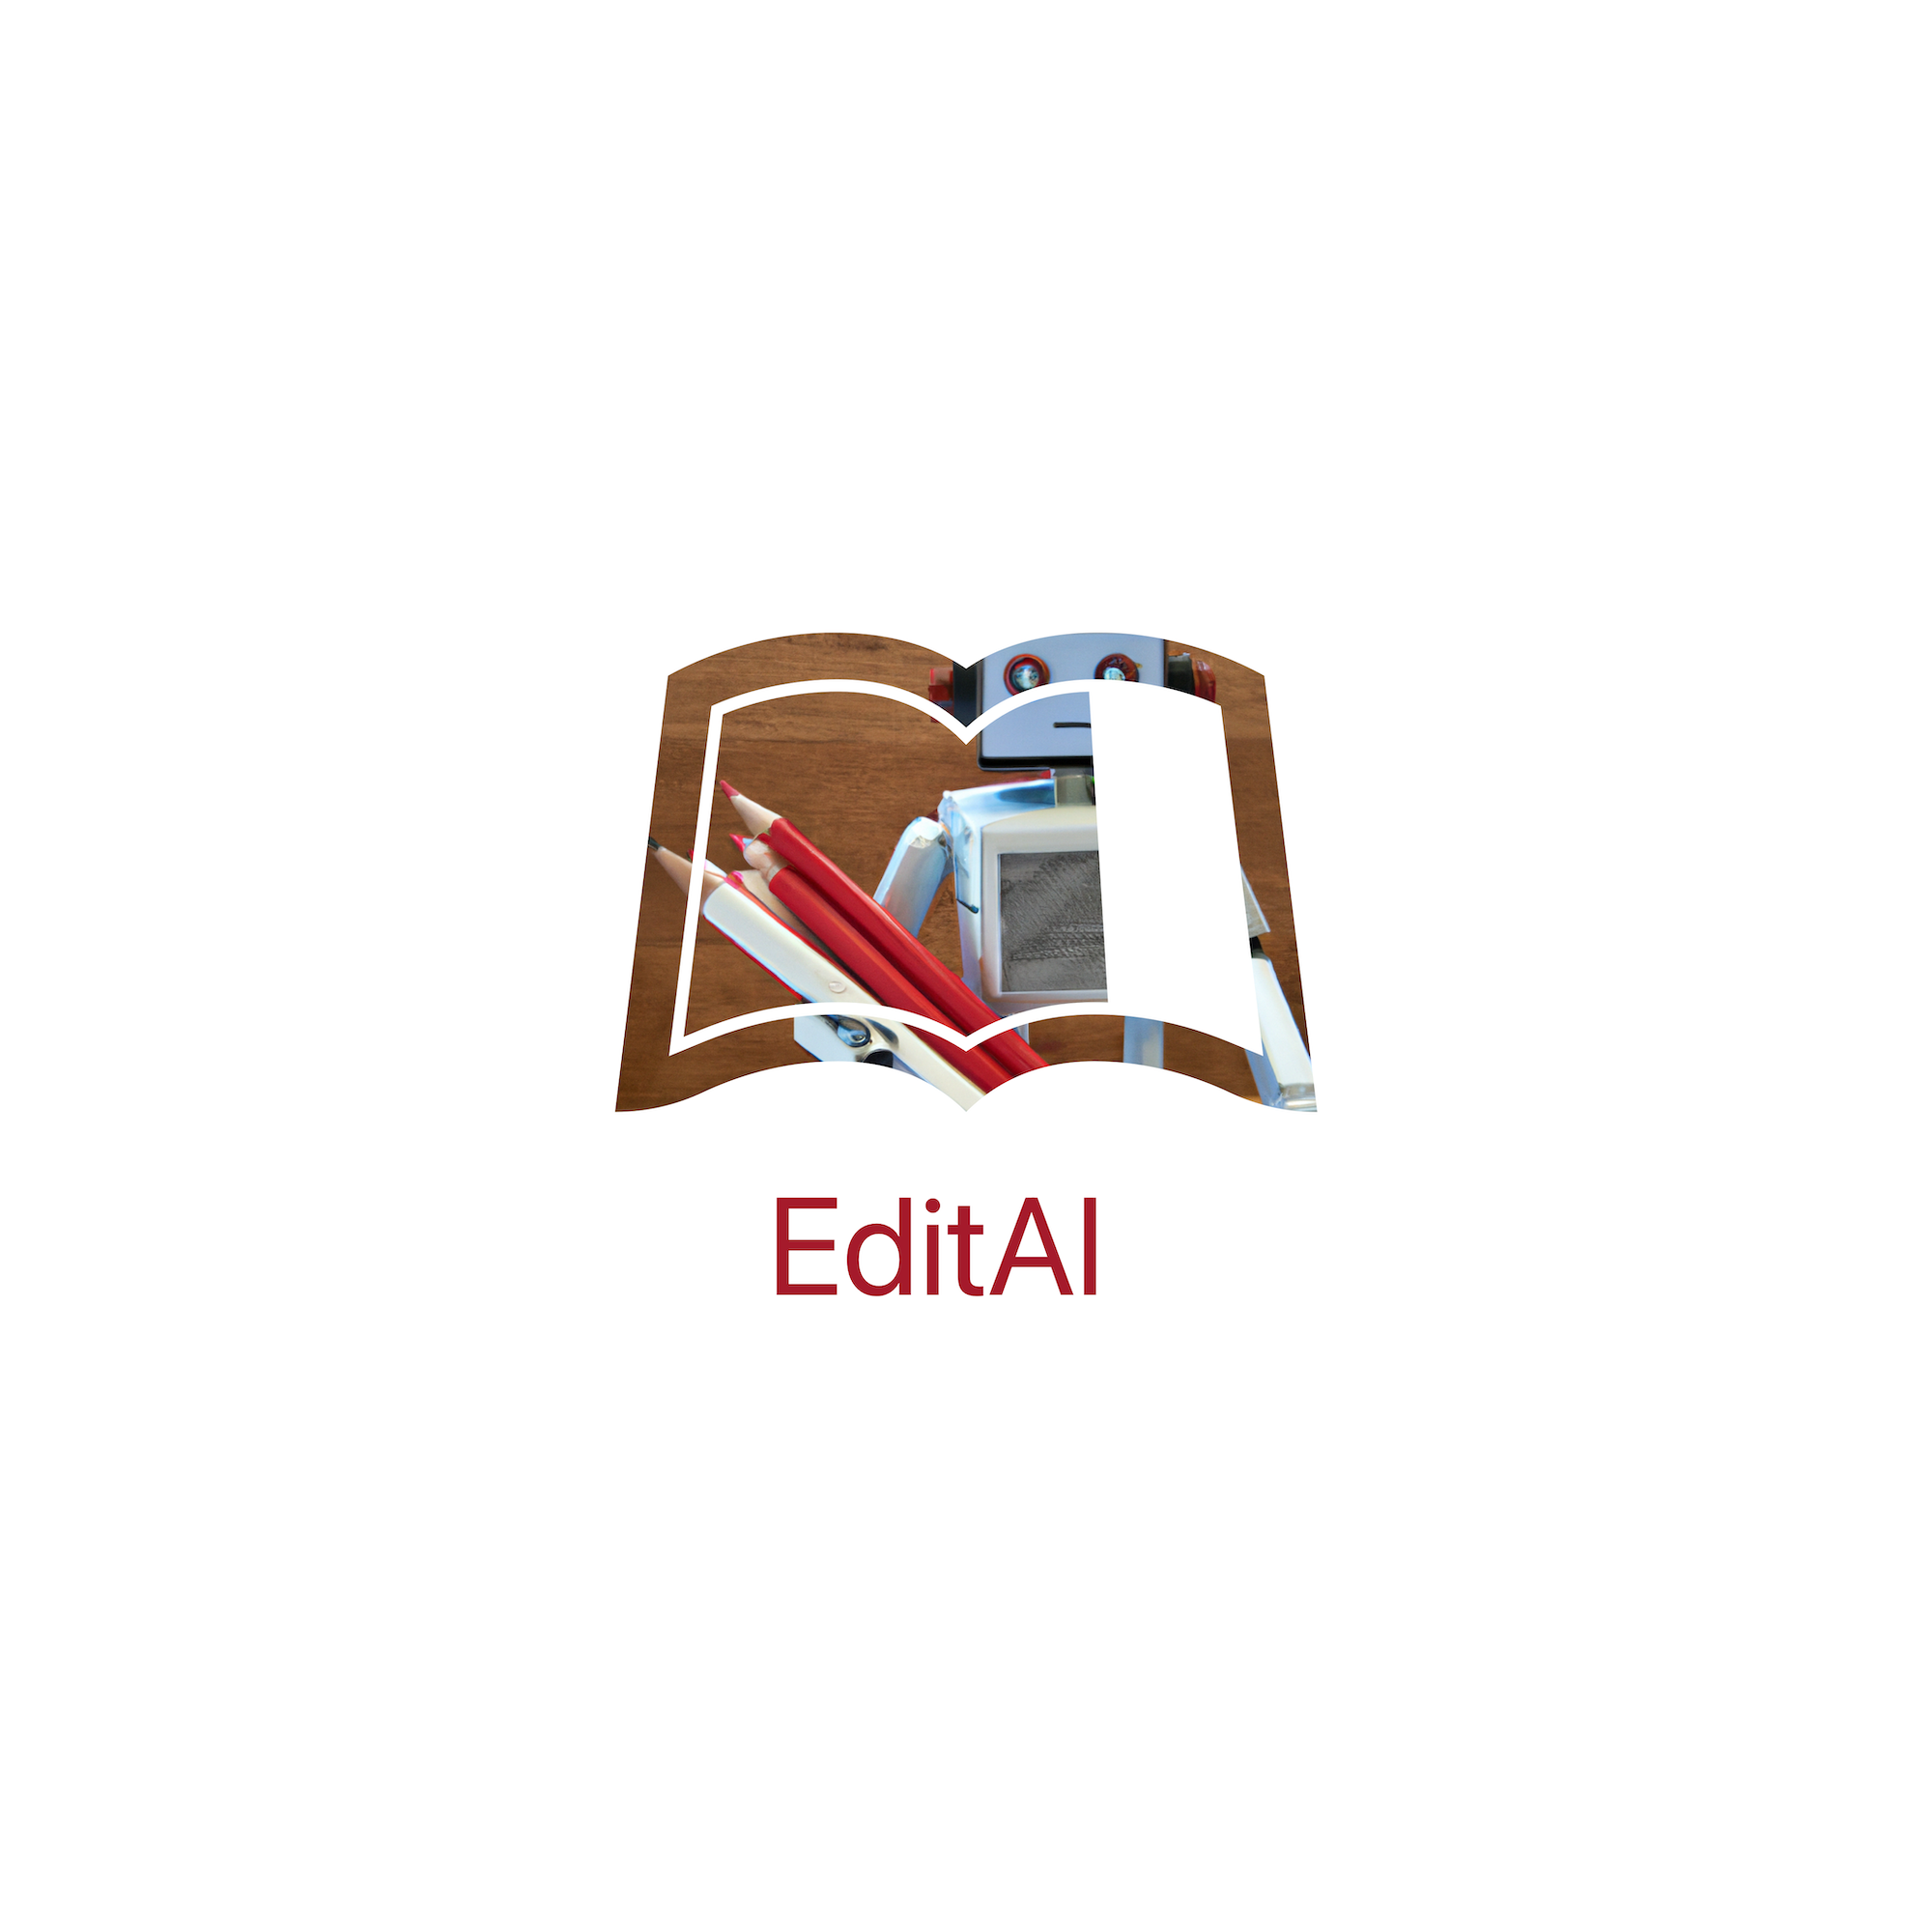 The logo for Leanpub's EditAI service for self-published authors